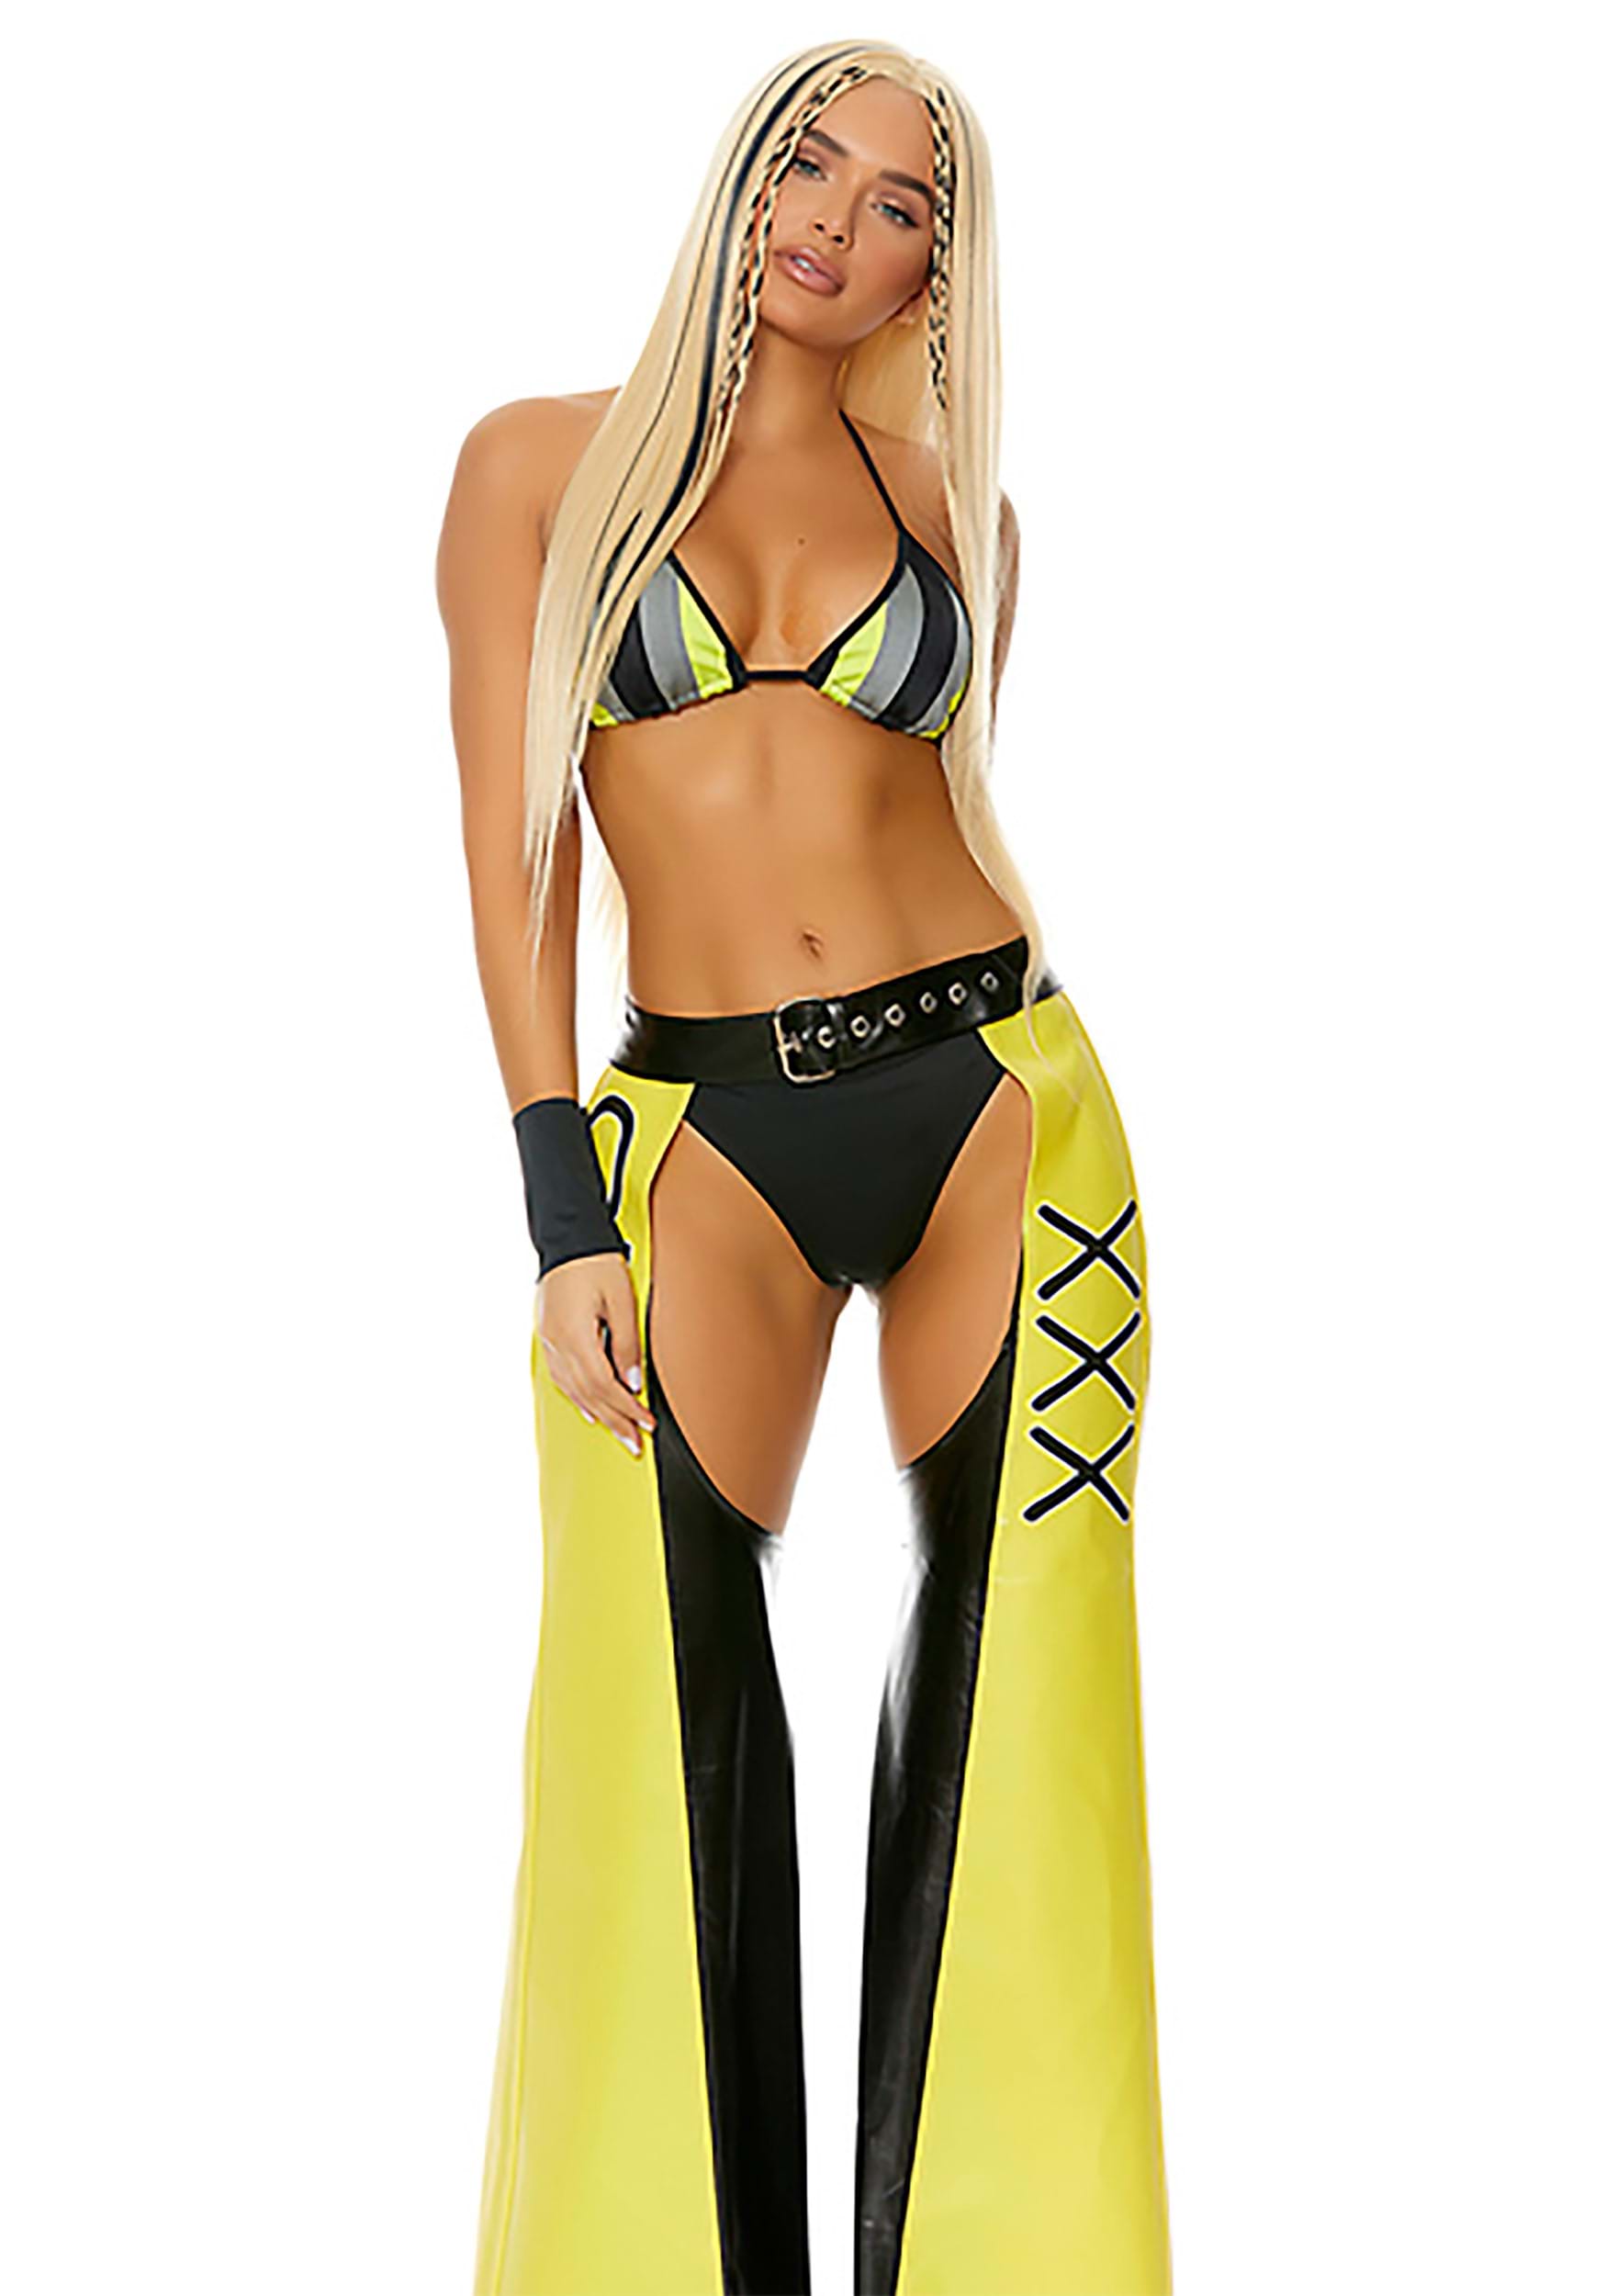 Women's Filthy Sexy Iconic Superstar Costume